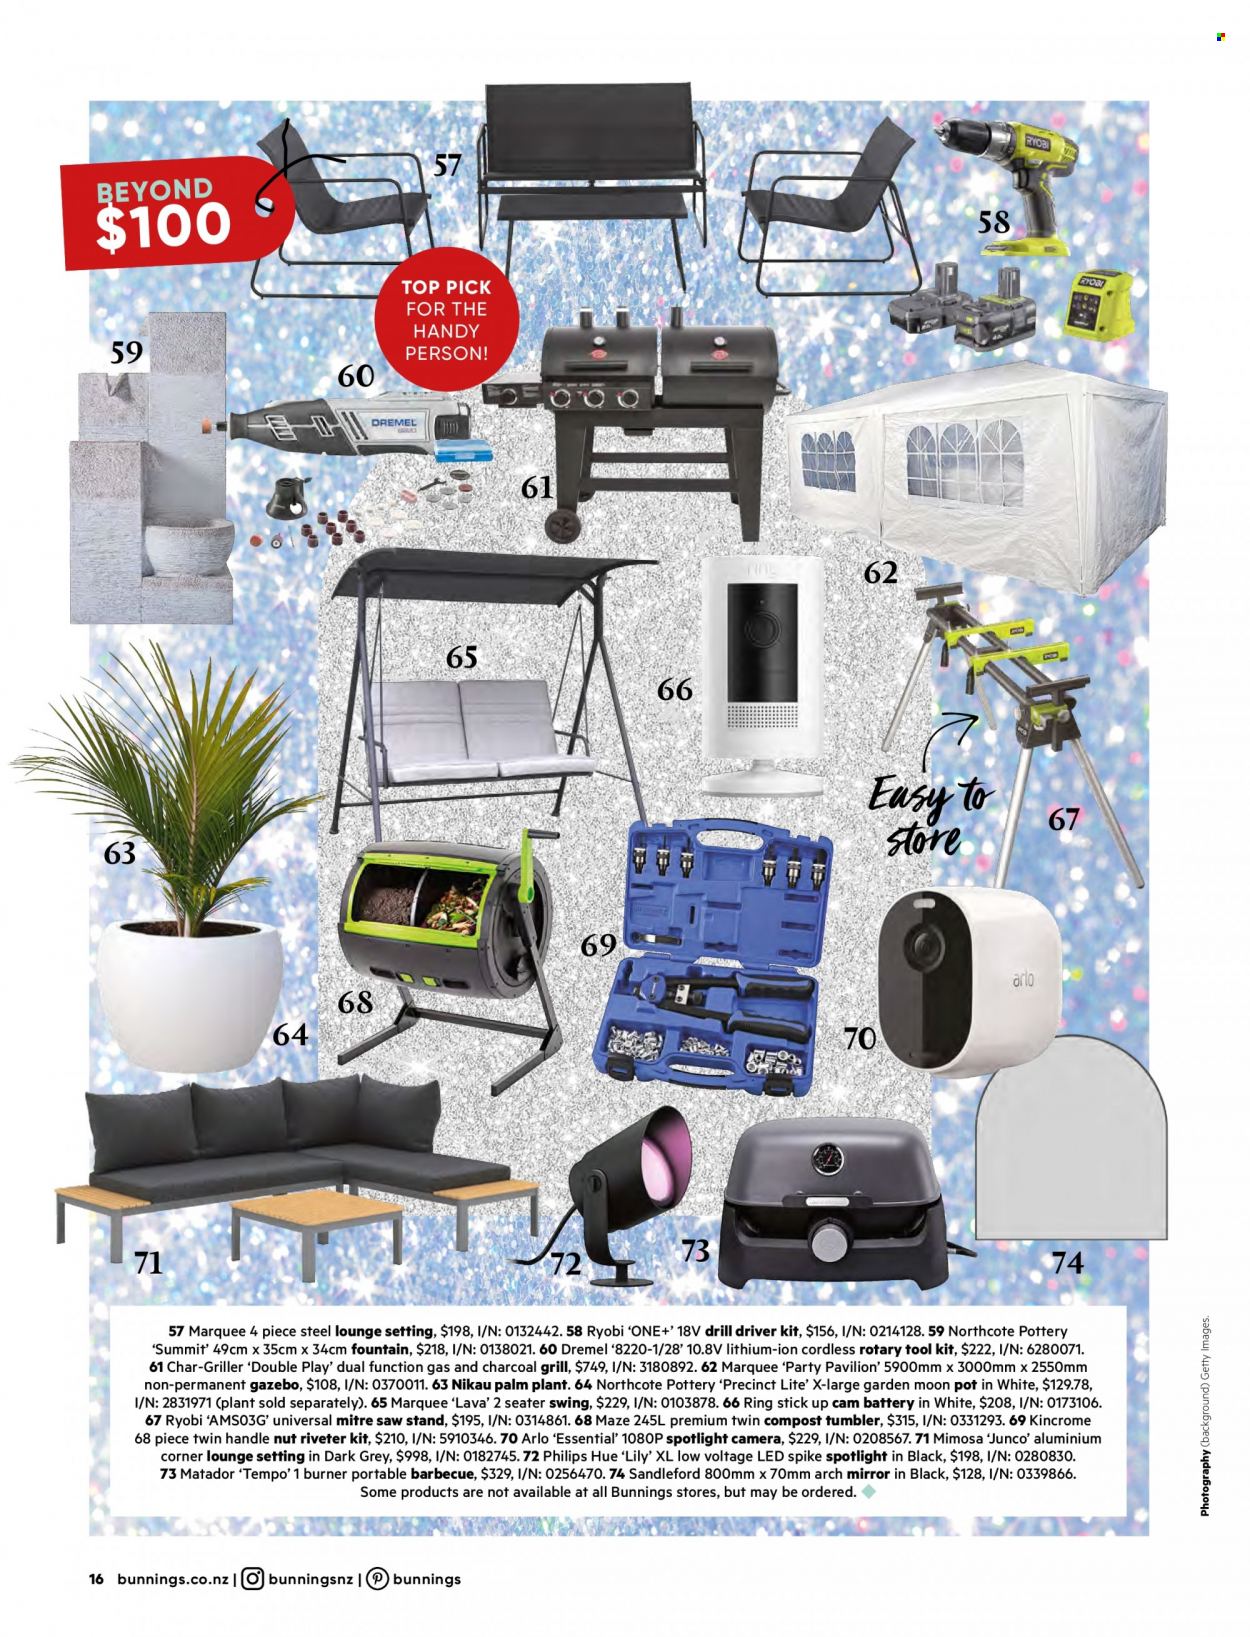 Bunnings Warehouse mailer . Page 16.